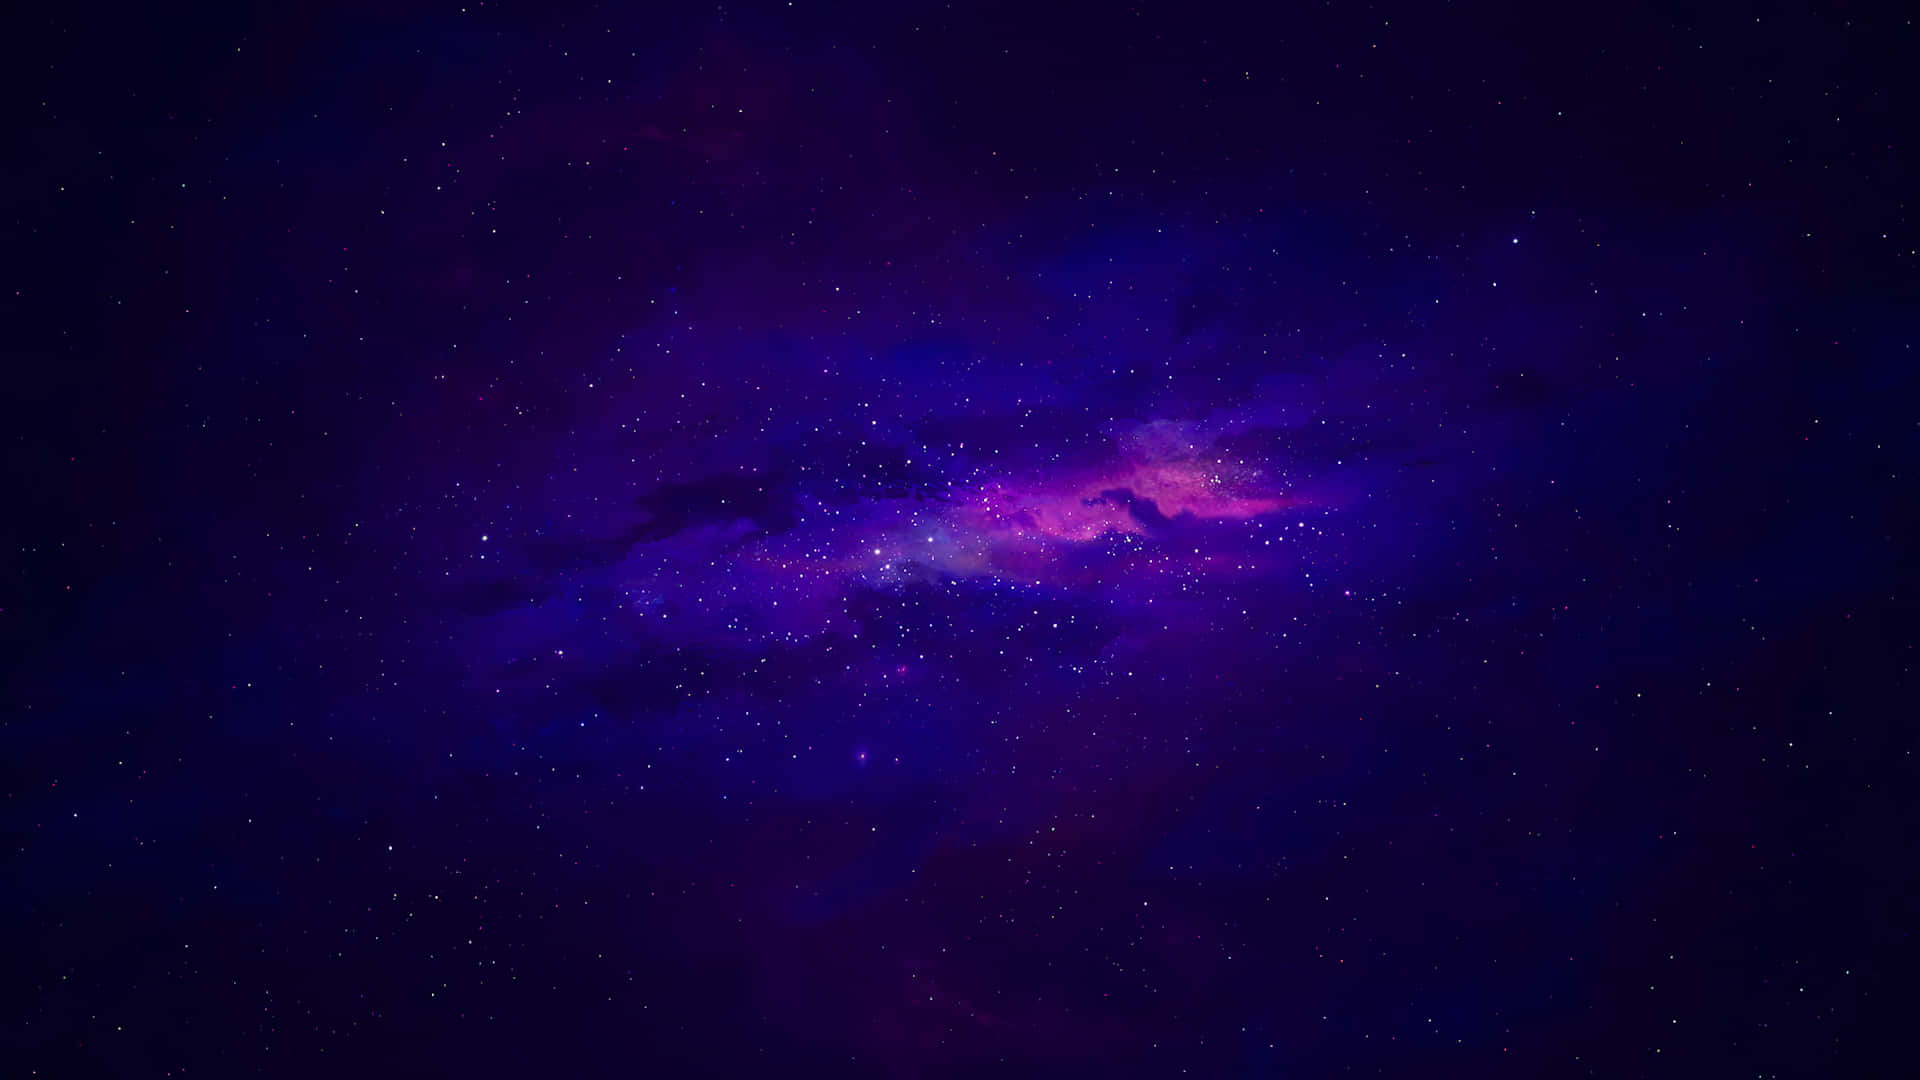 Take your Fortnite gaming experience to the next level with the Galaxy skin Wallpaper